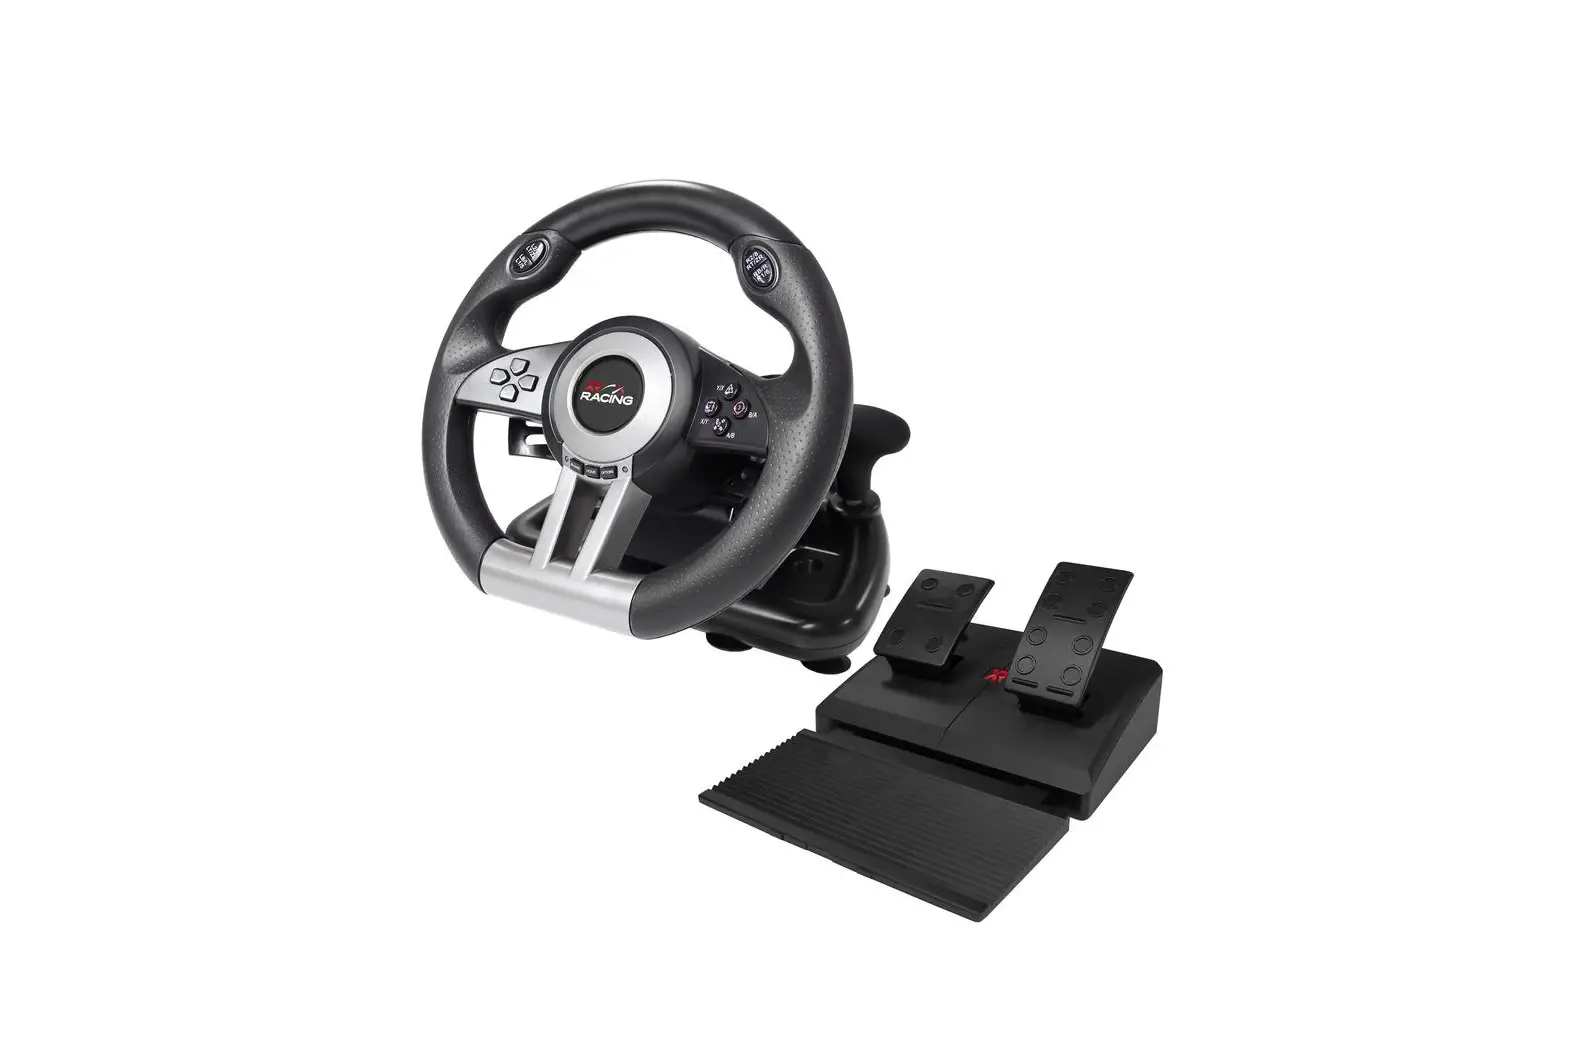 How To Enable Axis On Racing Wheel